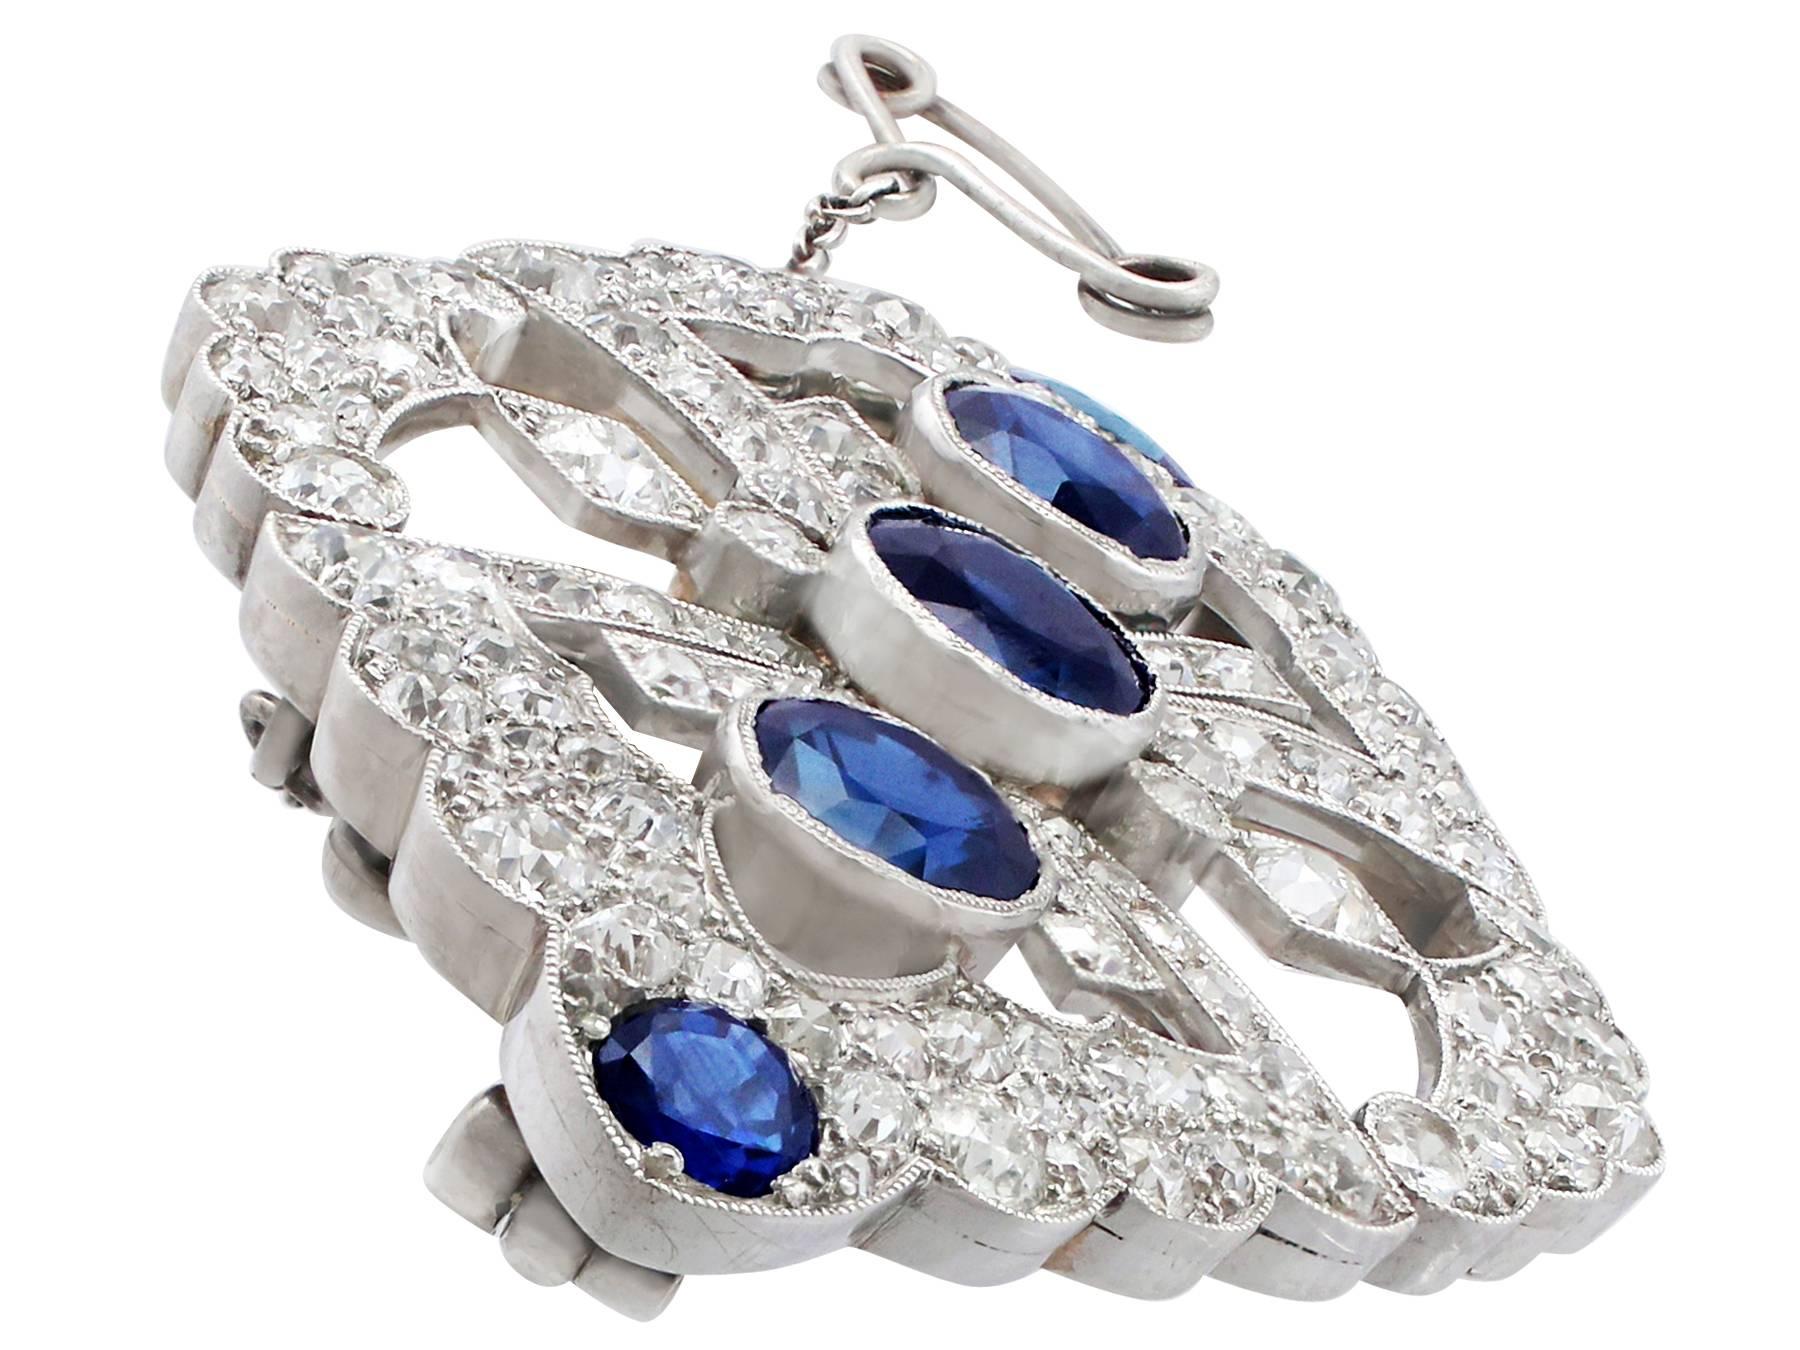 A large and exceptional, impressive Victorian 4.84 Ct sapphire and 4.00 Ct diamond, 9k white gold and platinum set brooch; part of the antique jewelry and estate jewelry collections

The pierced decorated frame of this large and impressive sapphire